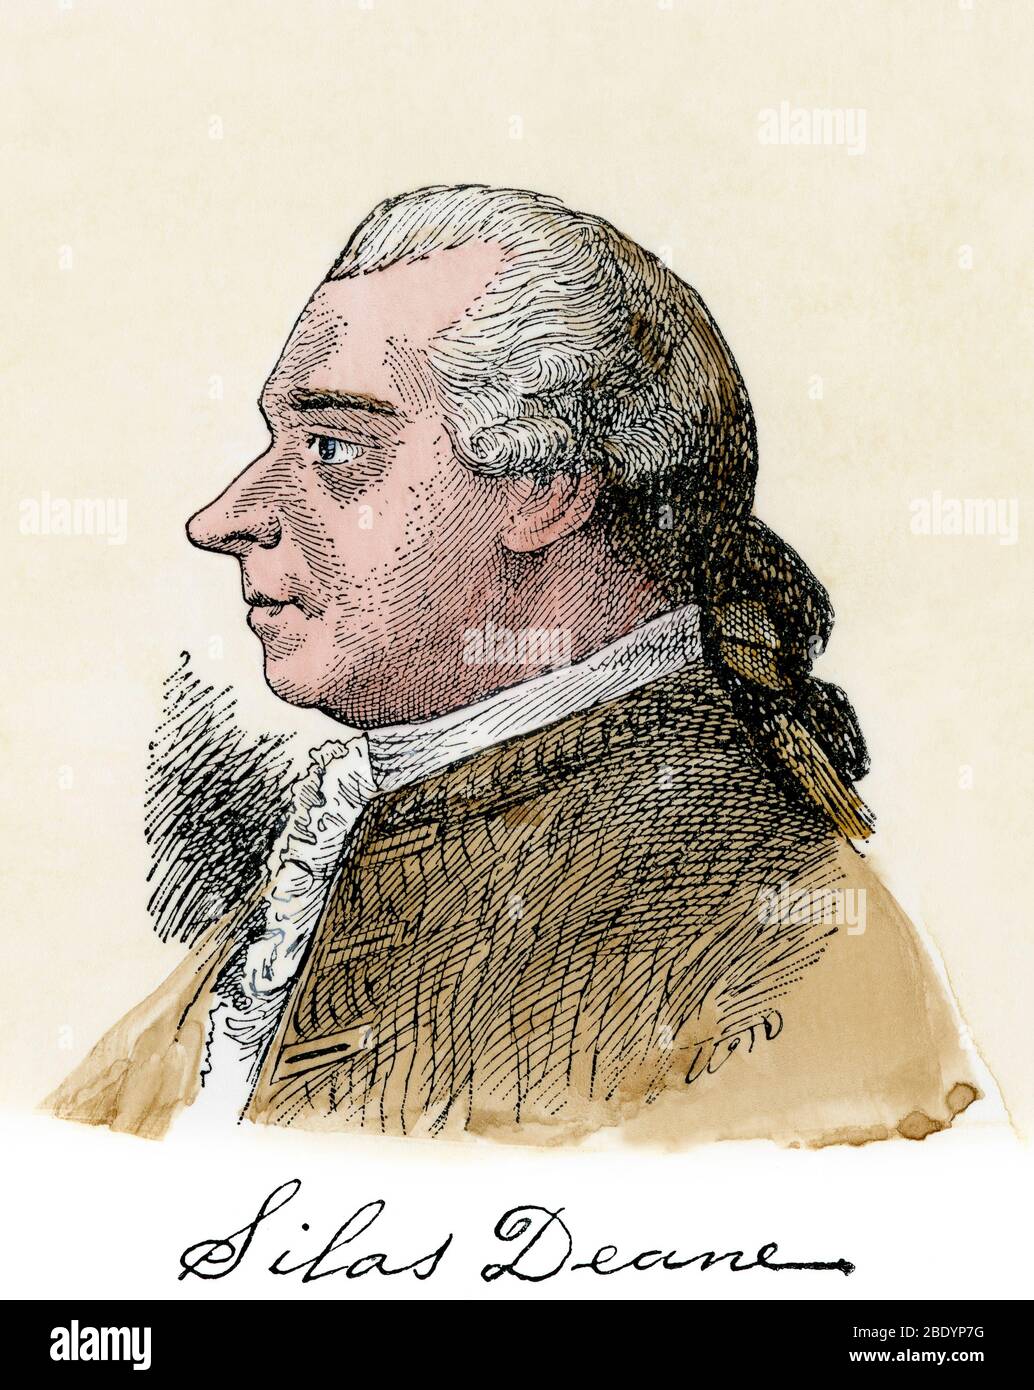 Silas Deane, with autograph, American Revolution patriot. Hand-colored woodcut Stock Photo